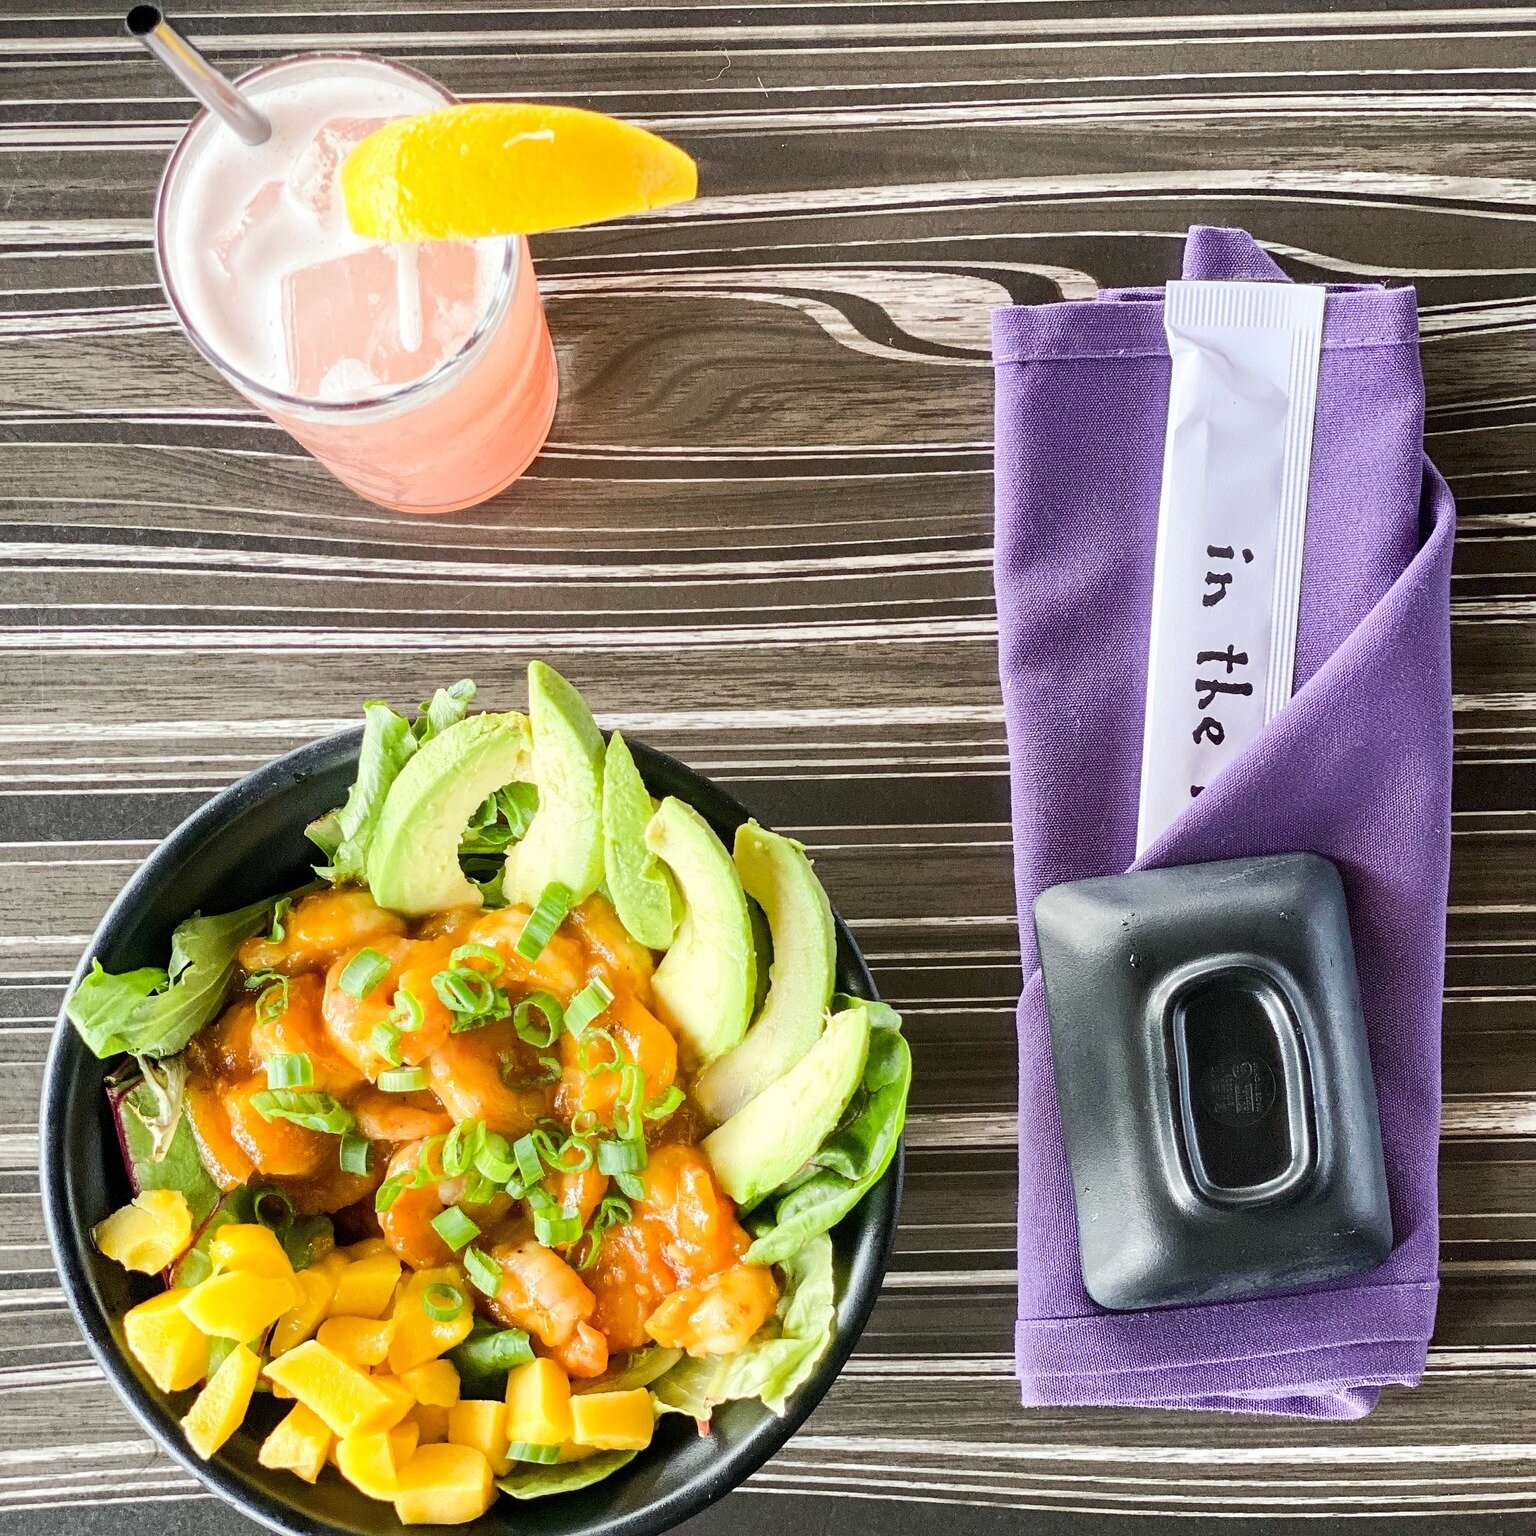 This week's special is shrimply the best. 🍤

Shrimp saut&eacute;ed with fresh ginger and garlic are finished in a smoky sweet and sour sauce with fresh mango, chipotle, and lemon juice. They are served over a spring mix with fresh mango and avocado.